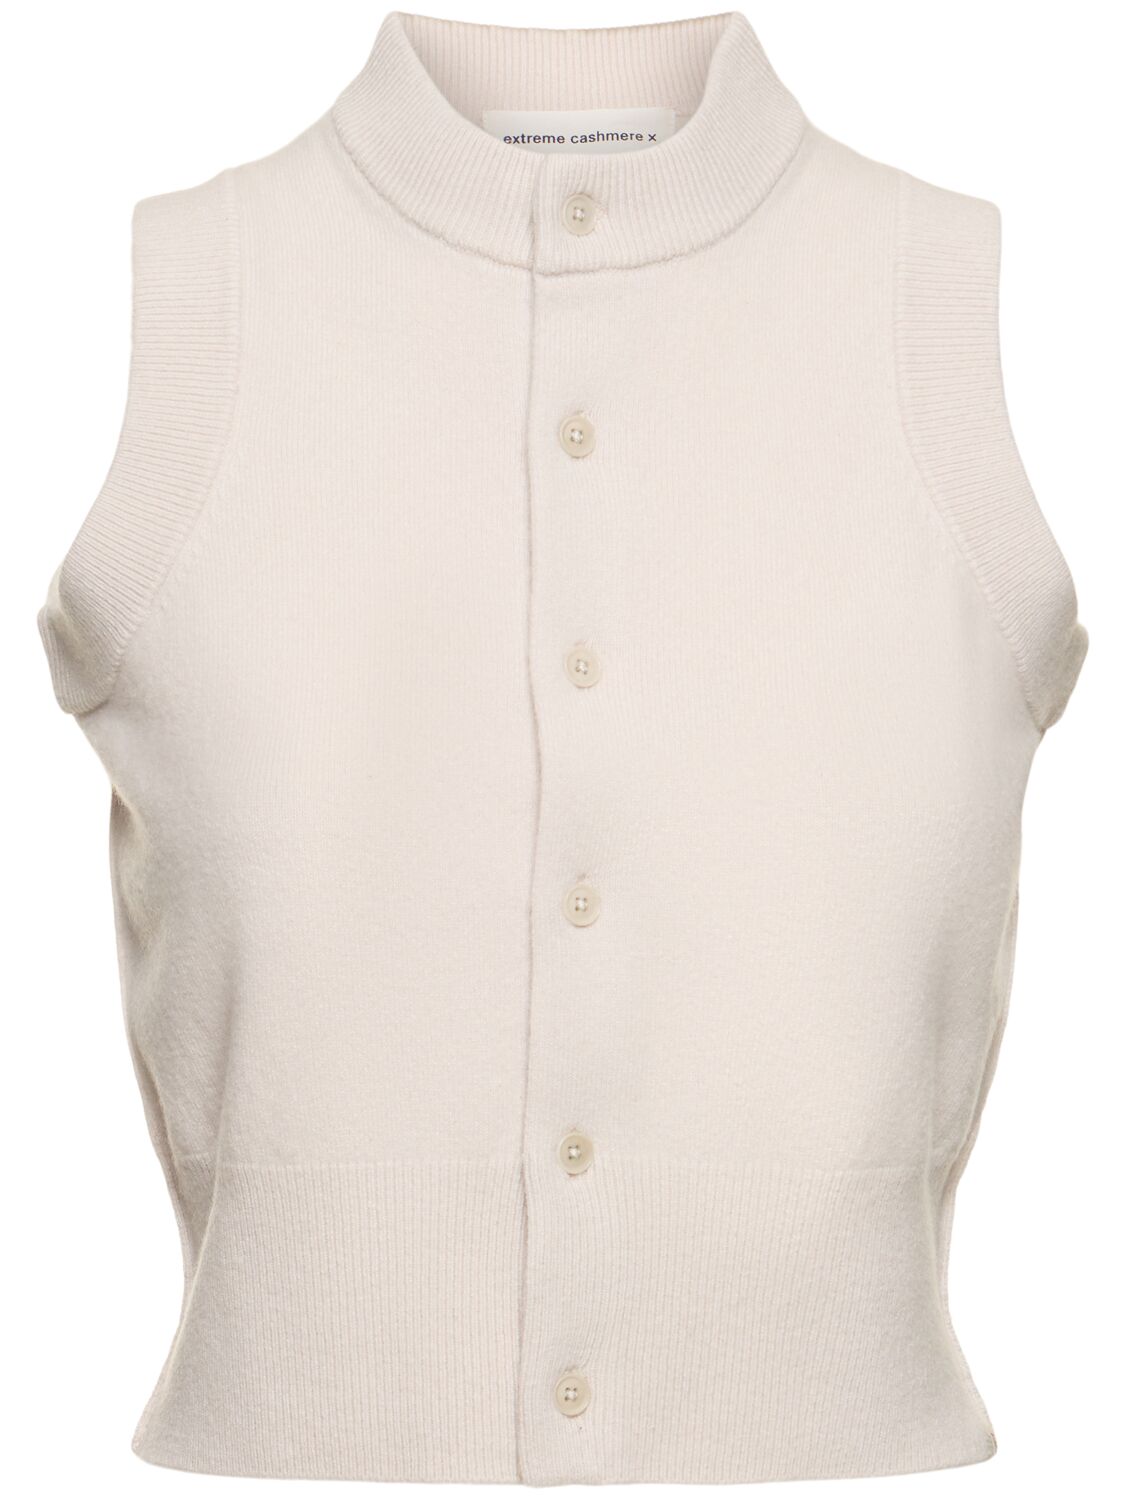 Extreme Cashmere Corset Cashmere Waistcoat In White